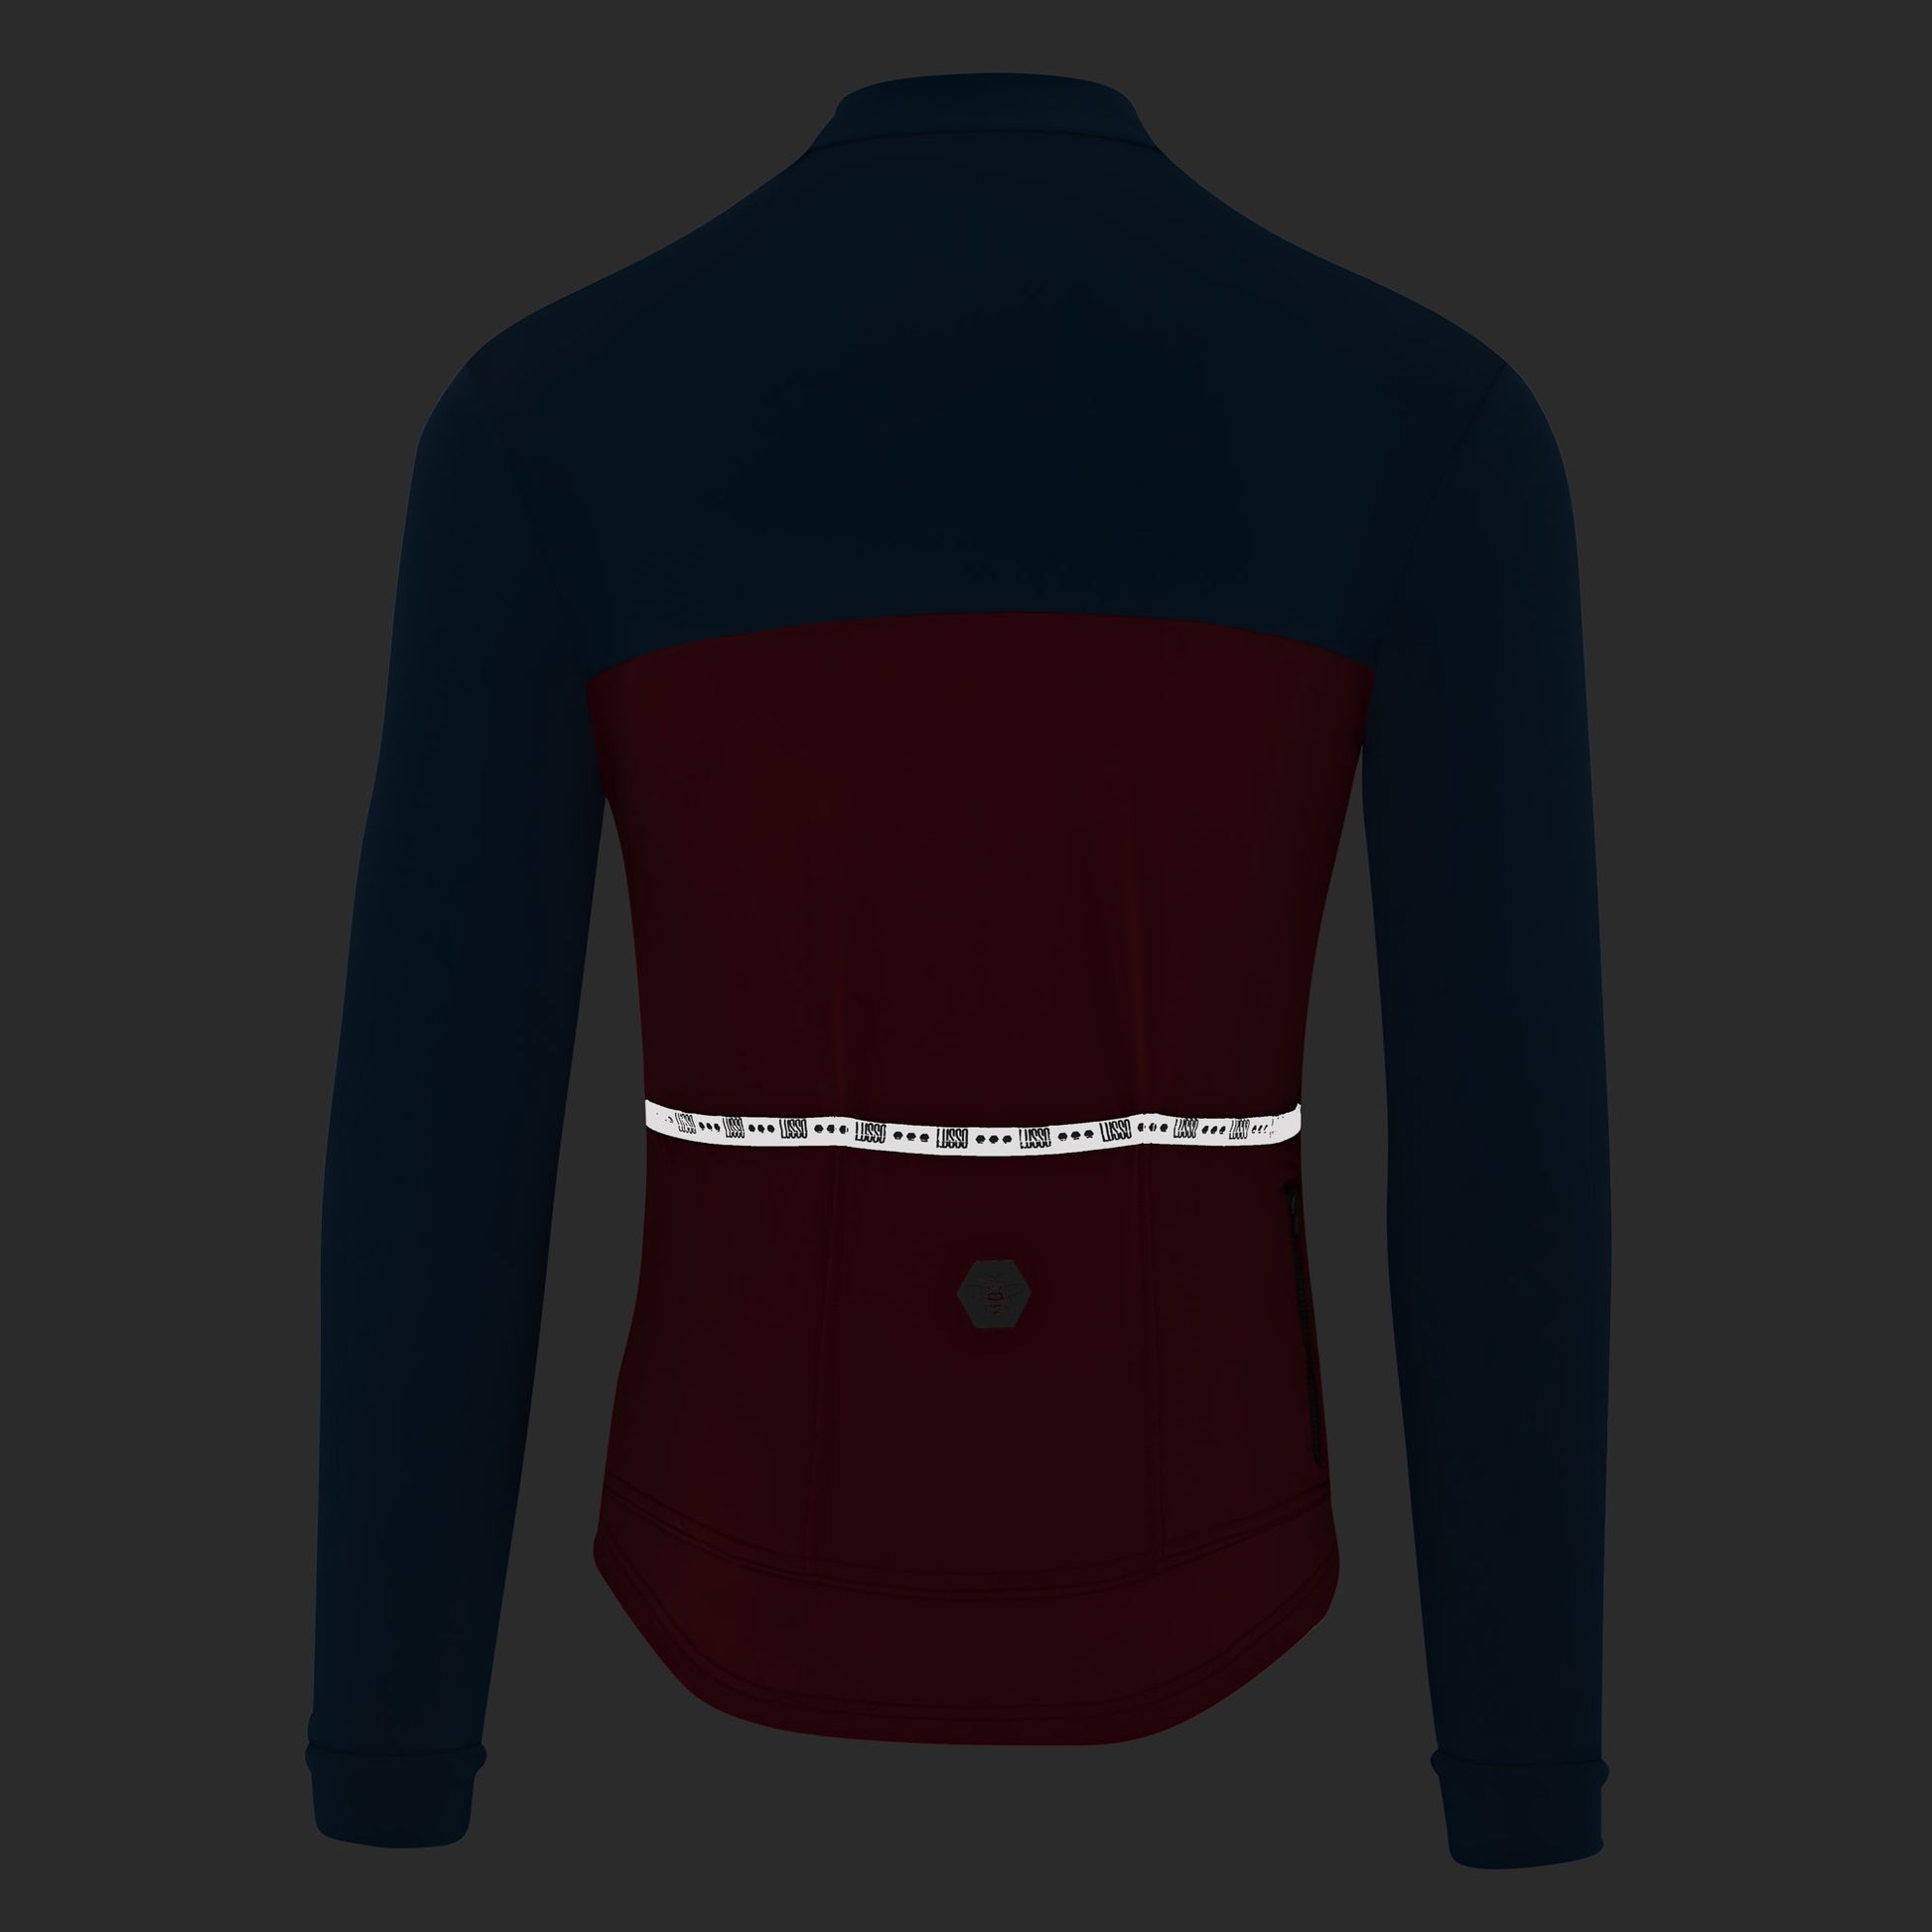 Paragon Thermal Long Sleeve Jersey - Lusso Cycle Wear